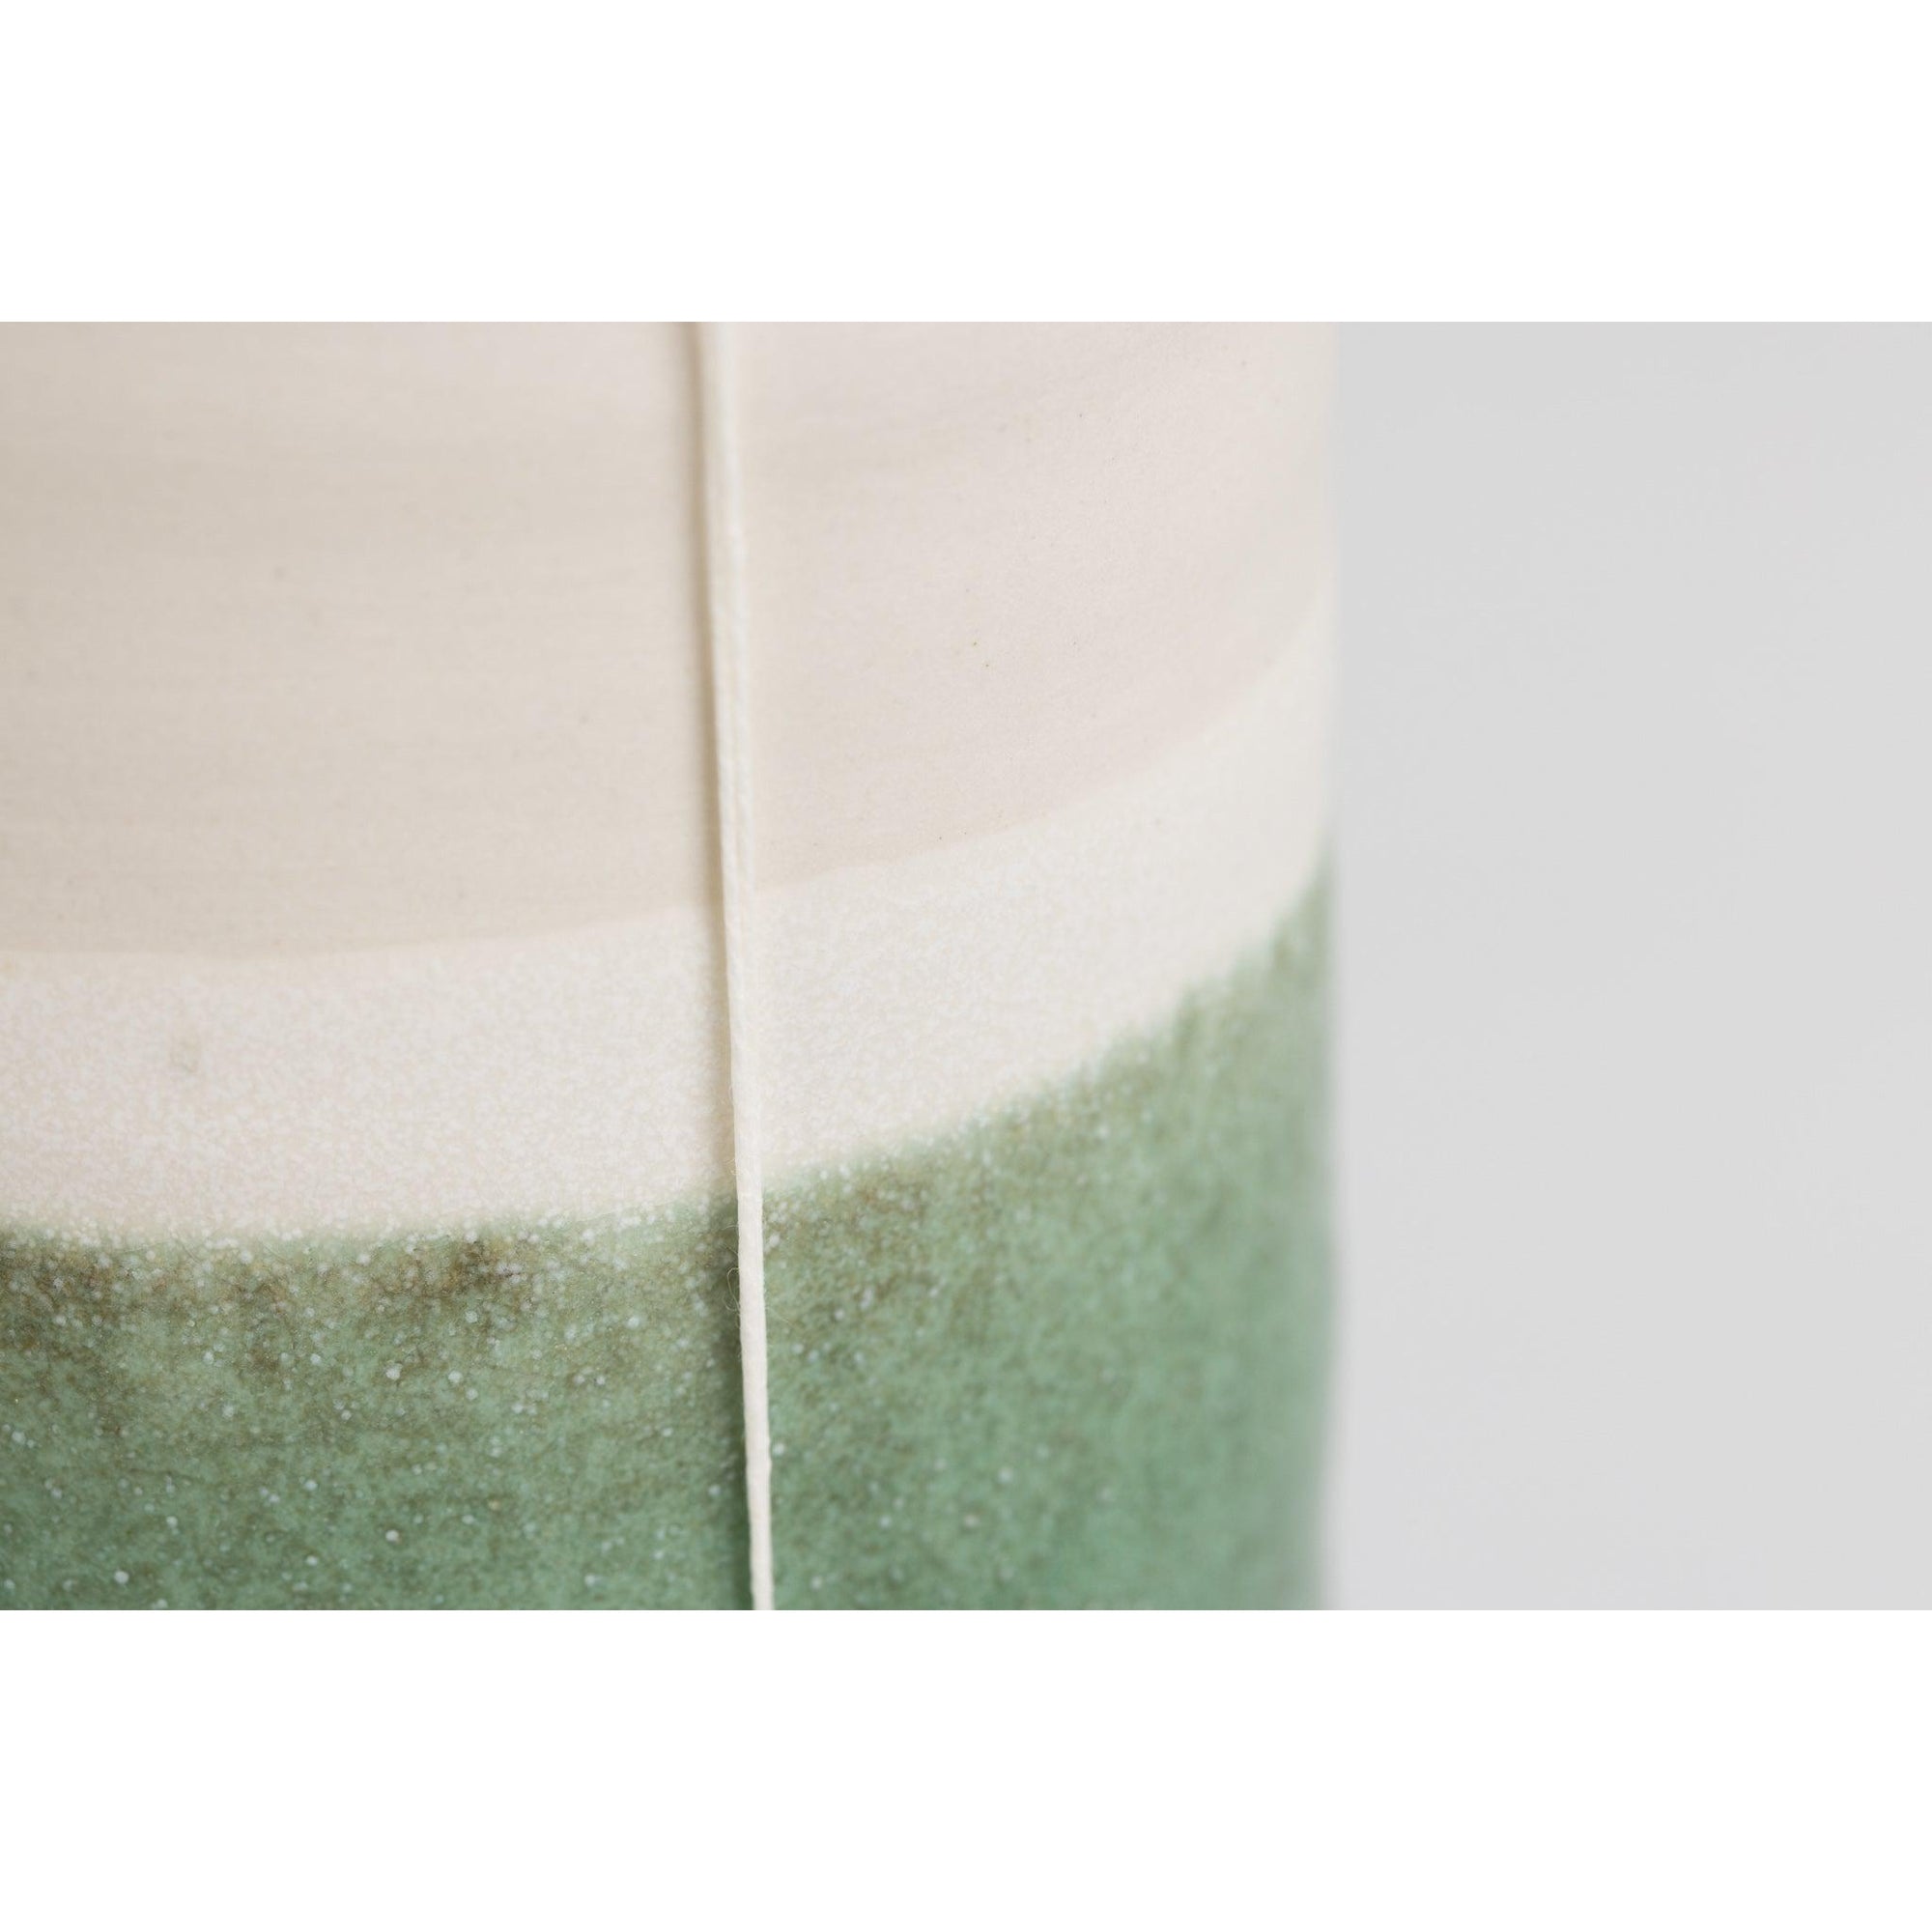 KSS2 Stoneware Bound Container by Kate Schuricht, available at Padstow Gallery, Cornwall